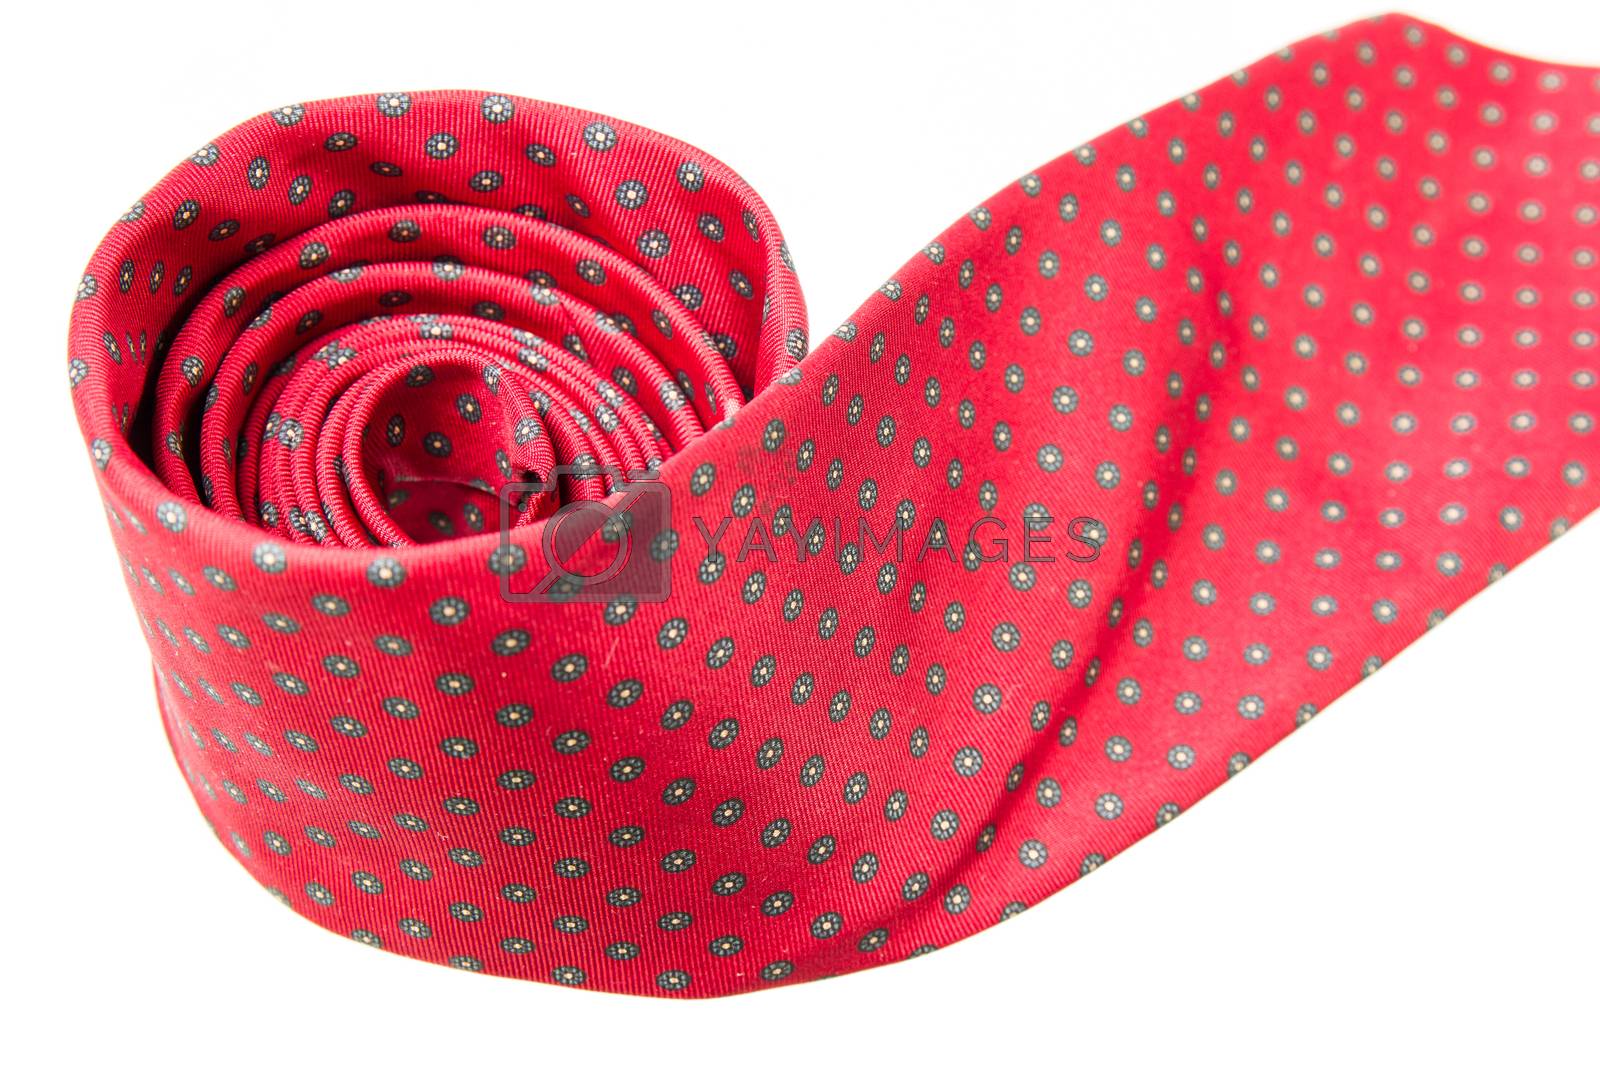 Royalty free image of red with green dots business neck tie by kasinv